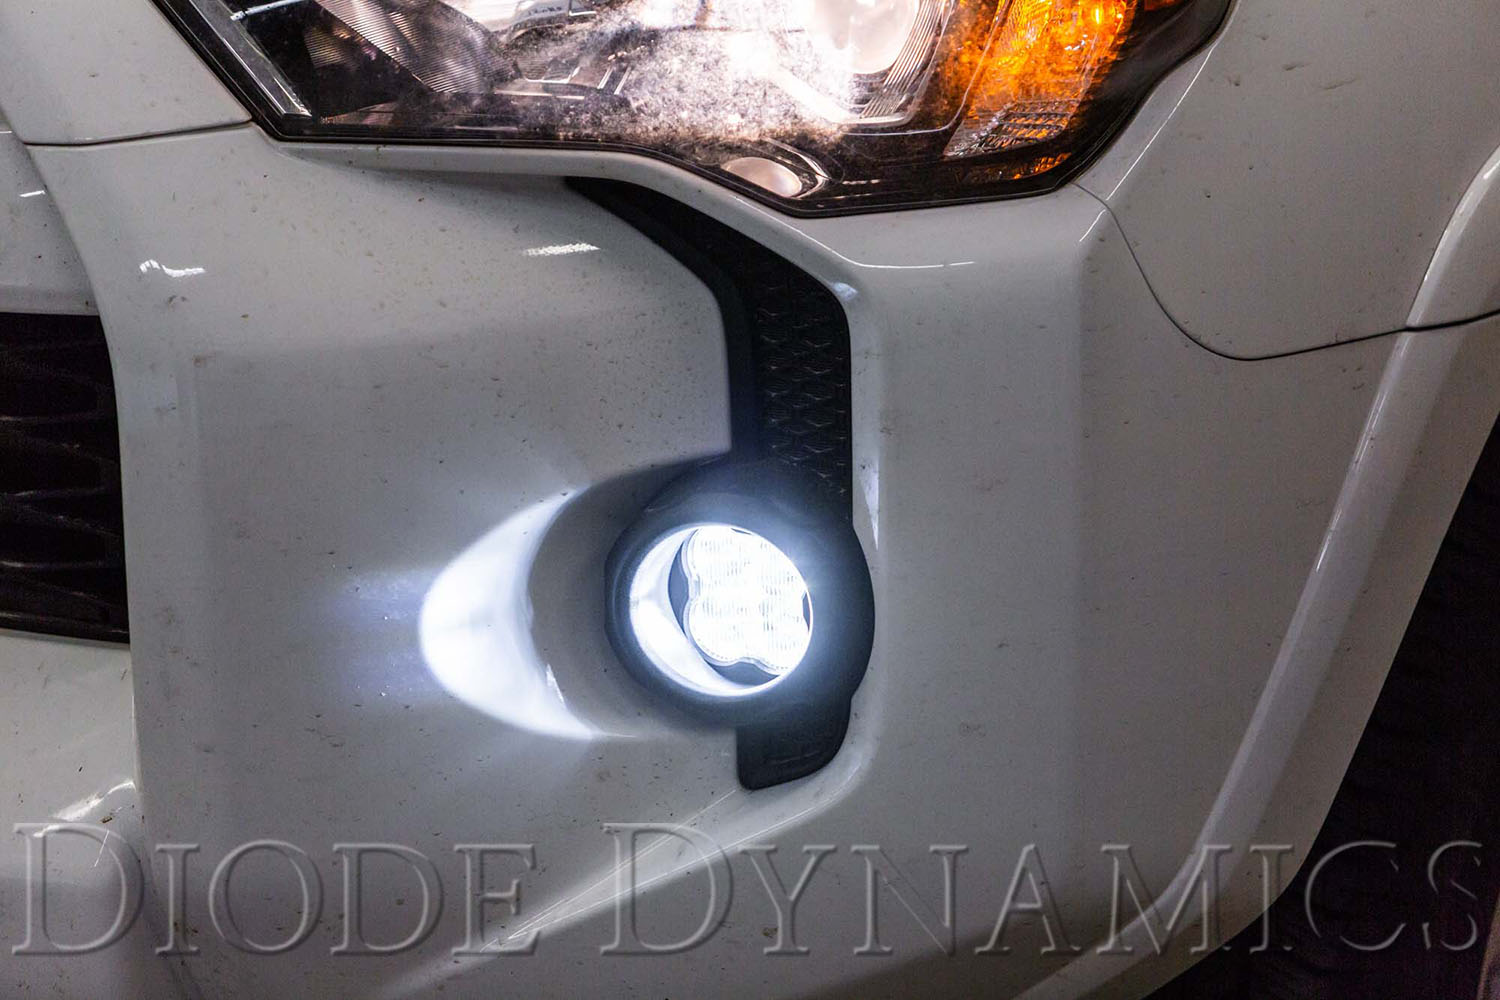 Diode Dynamics SS3 LED Fog Light Kit for 2010-2019 Toyota 4Runner [DD618x]  $280.00 Pure 4Runner, Parts and Accessories for your Toyota 4Runner